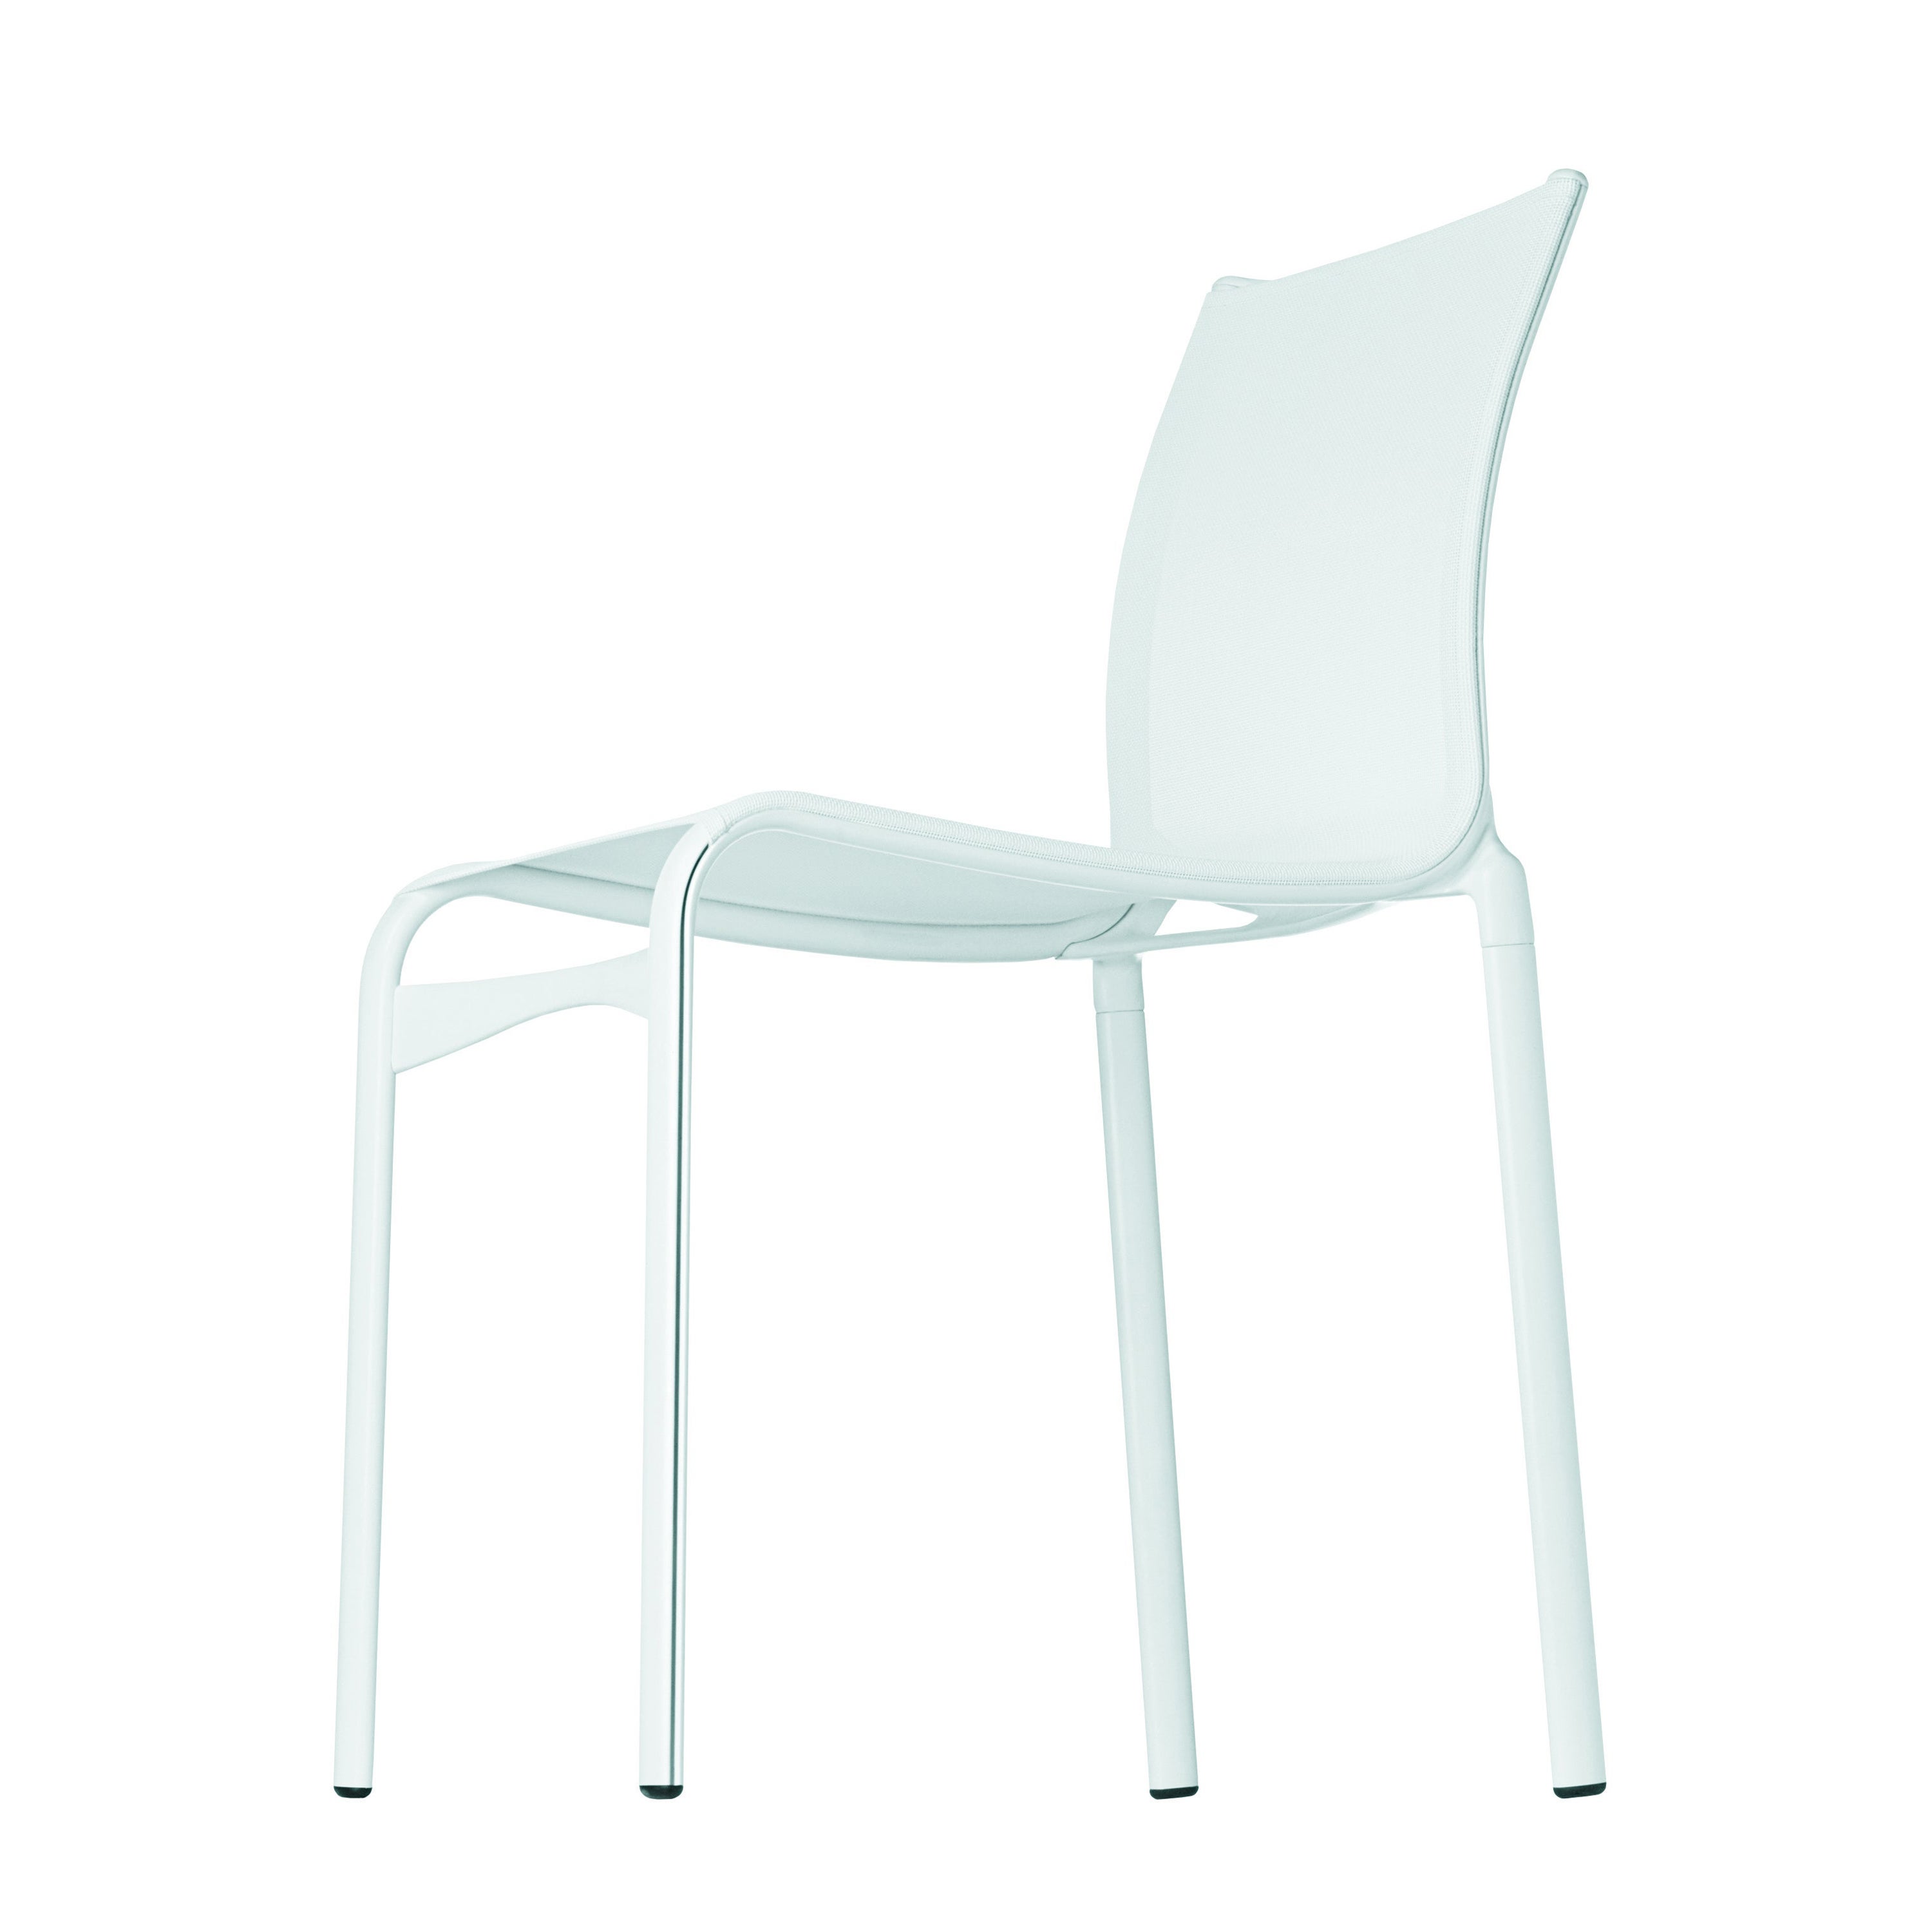 Alias Highframe 40 Chair in White Mesh with Lacquered Aluminium Frame For Sale